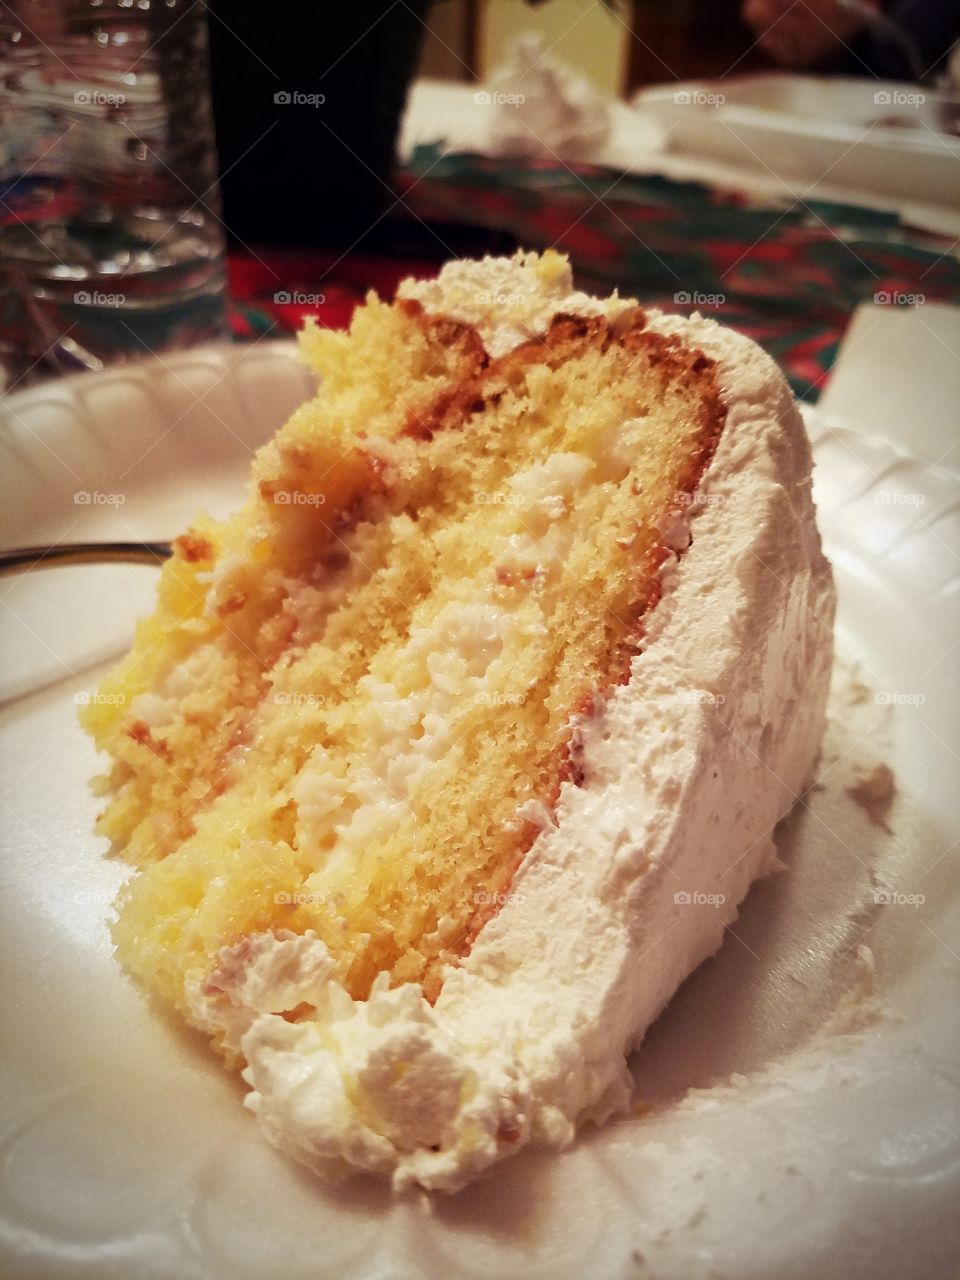 Grandmas Coconut cake with lemon filling in the layers